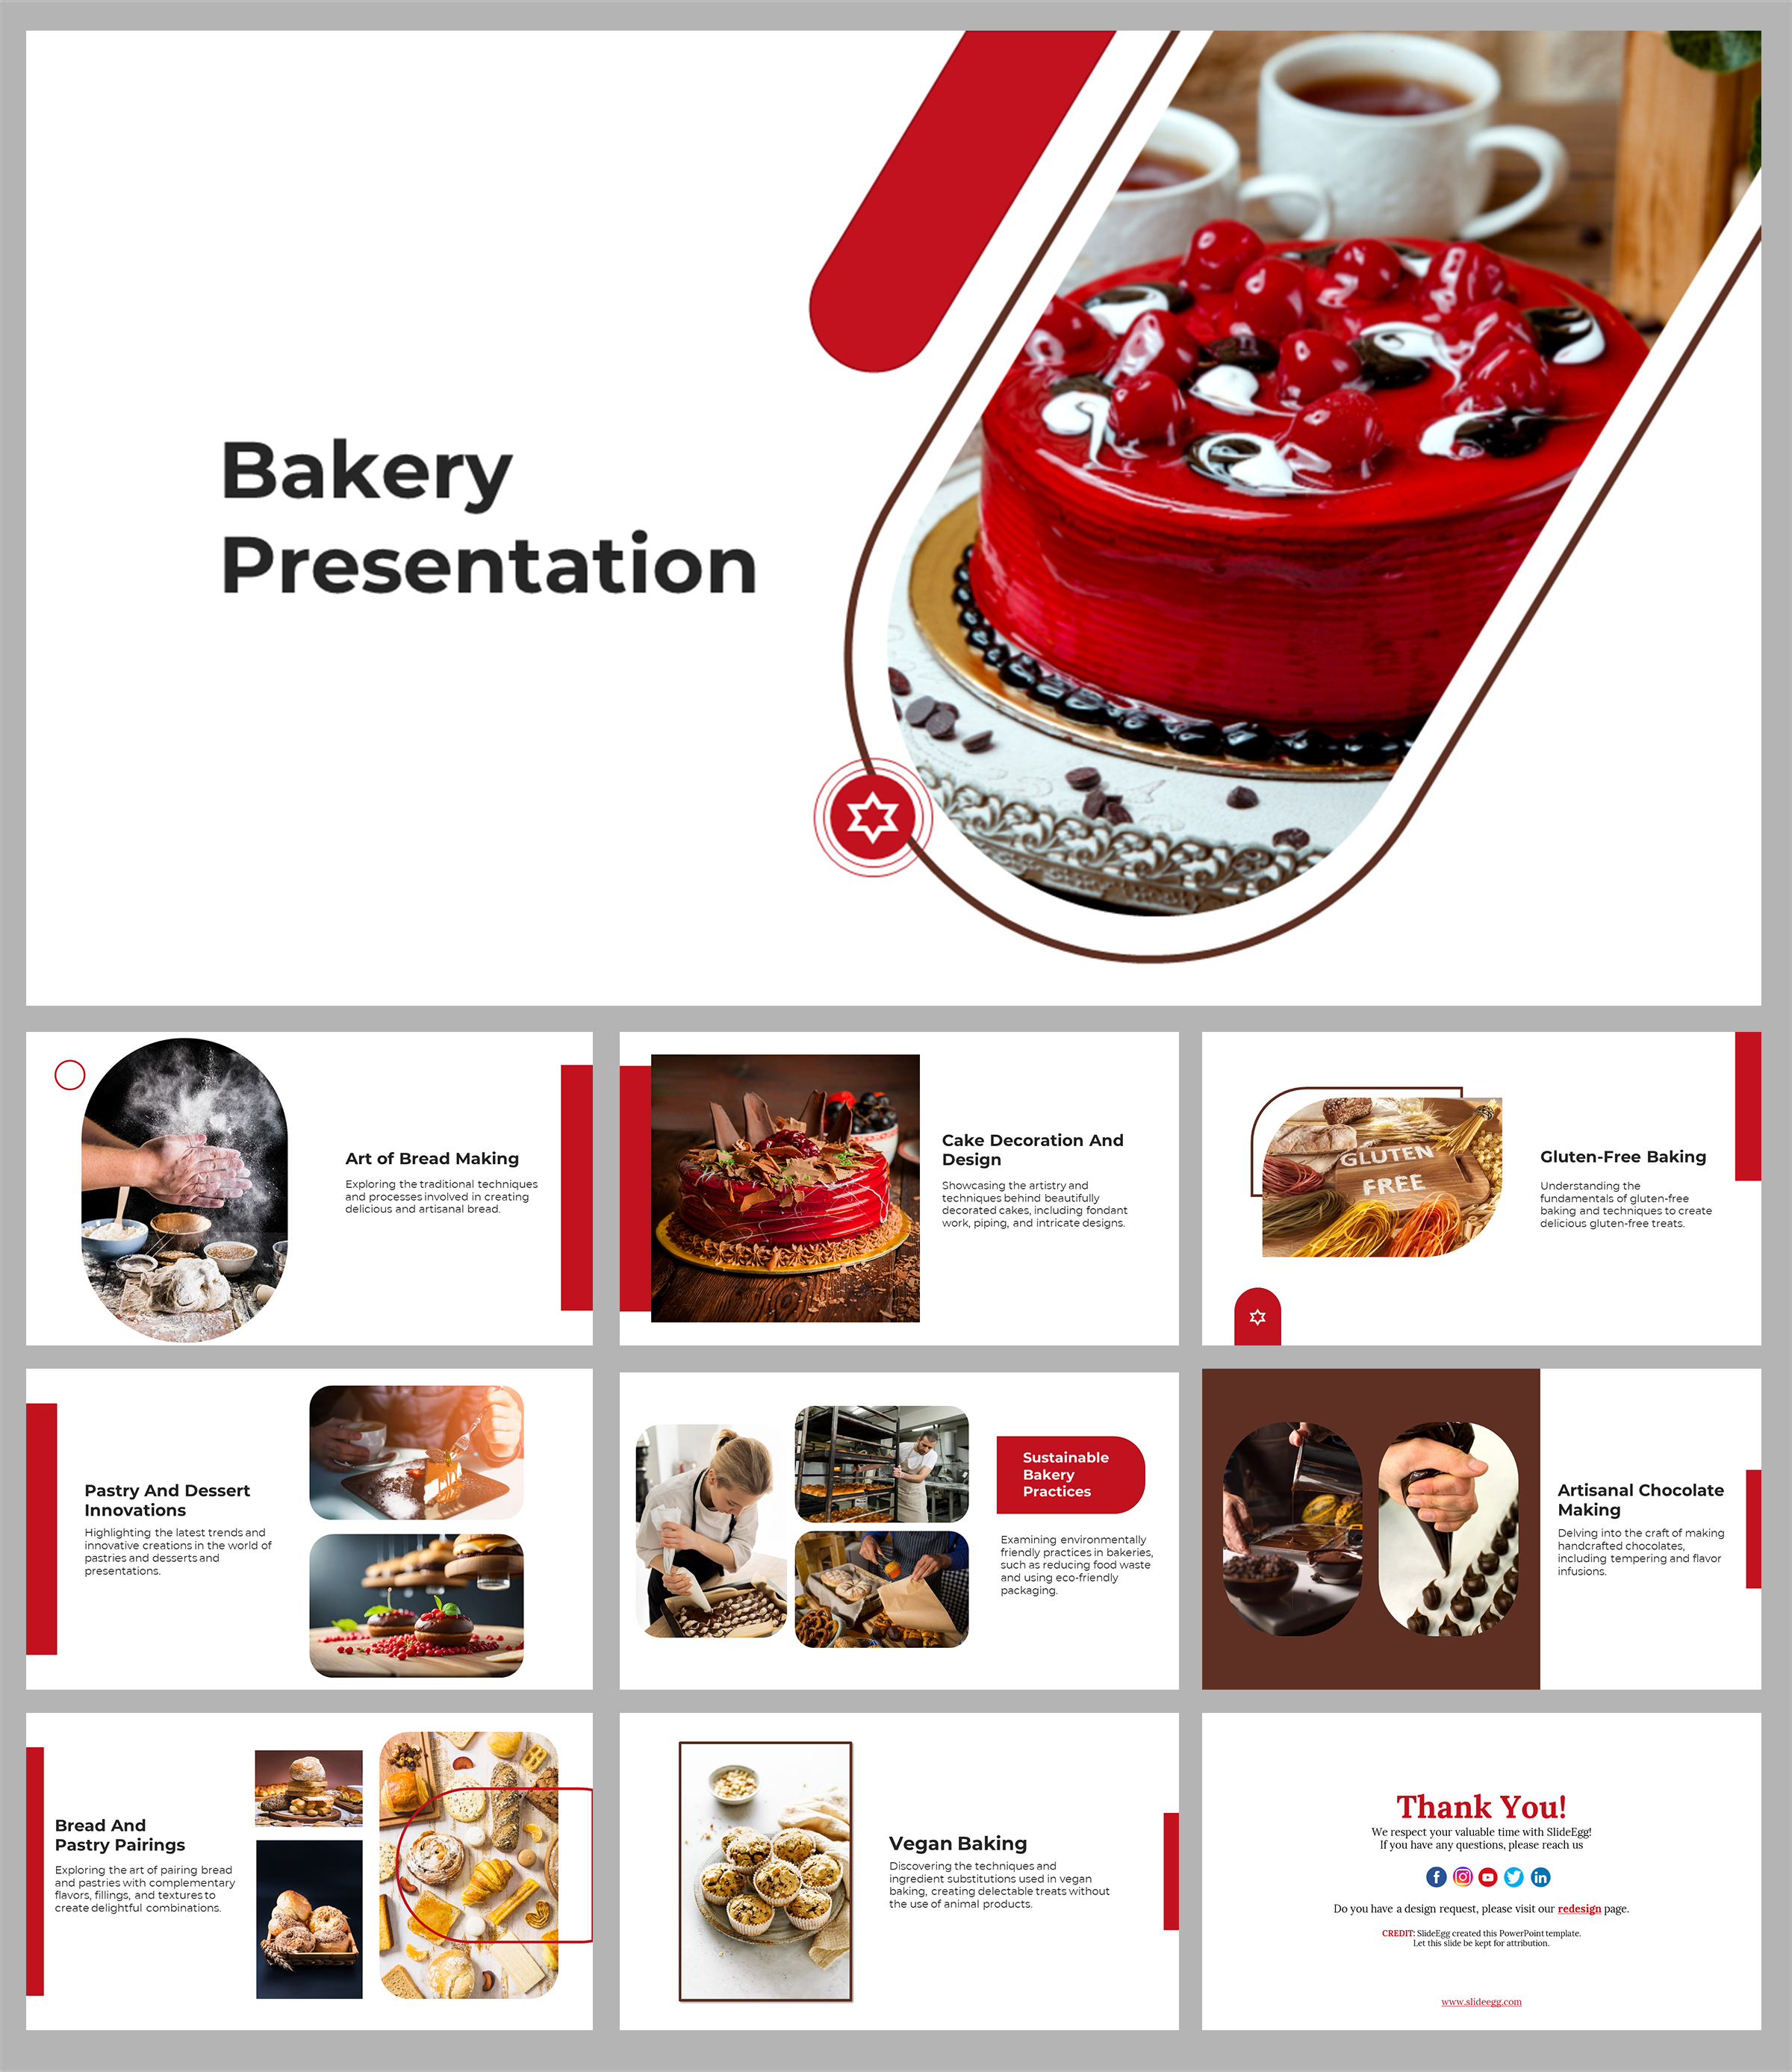 Christmas Cake Icon With Decoration On Top | Template Presentation | Sample  of PPT Presentation | Presentation Background Images